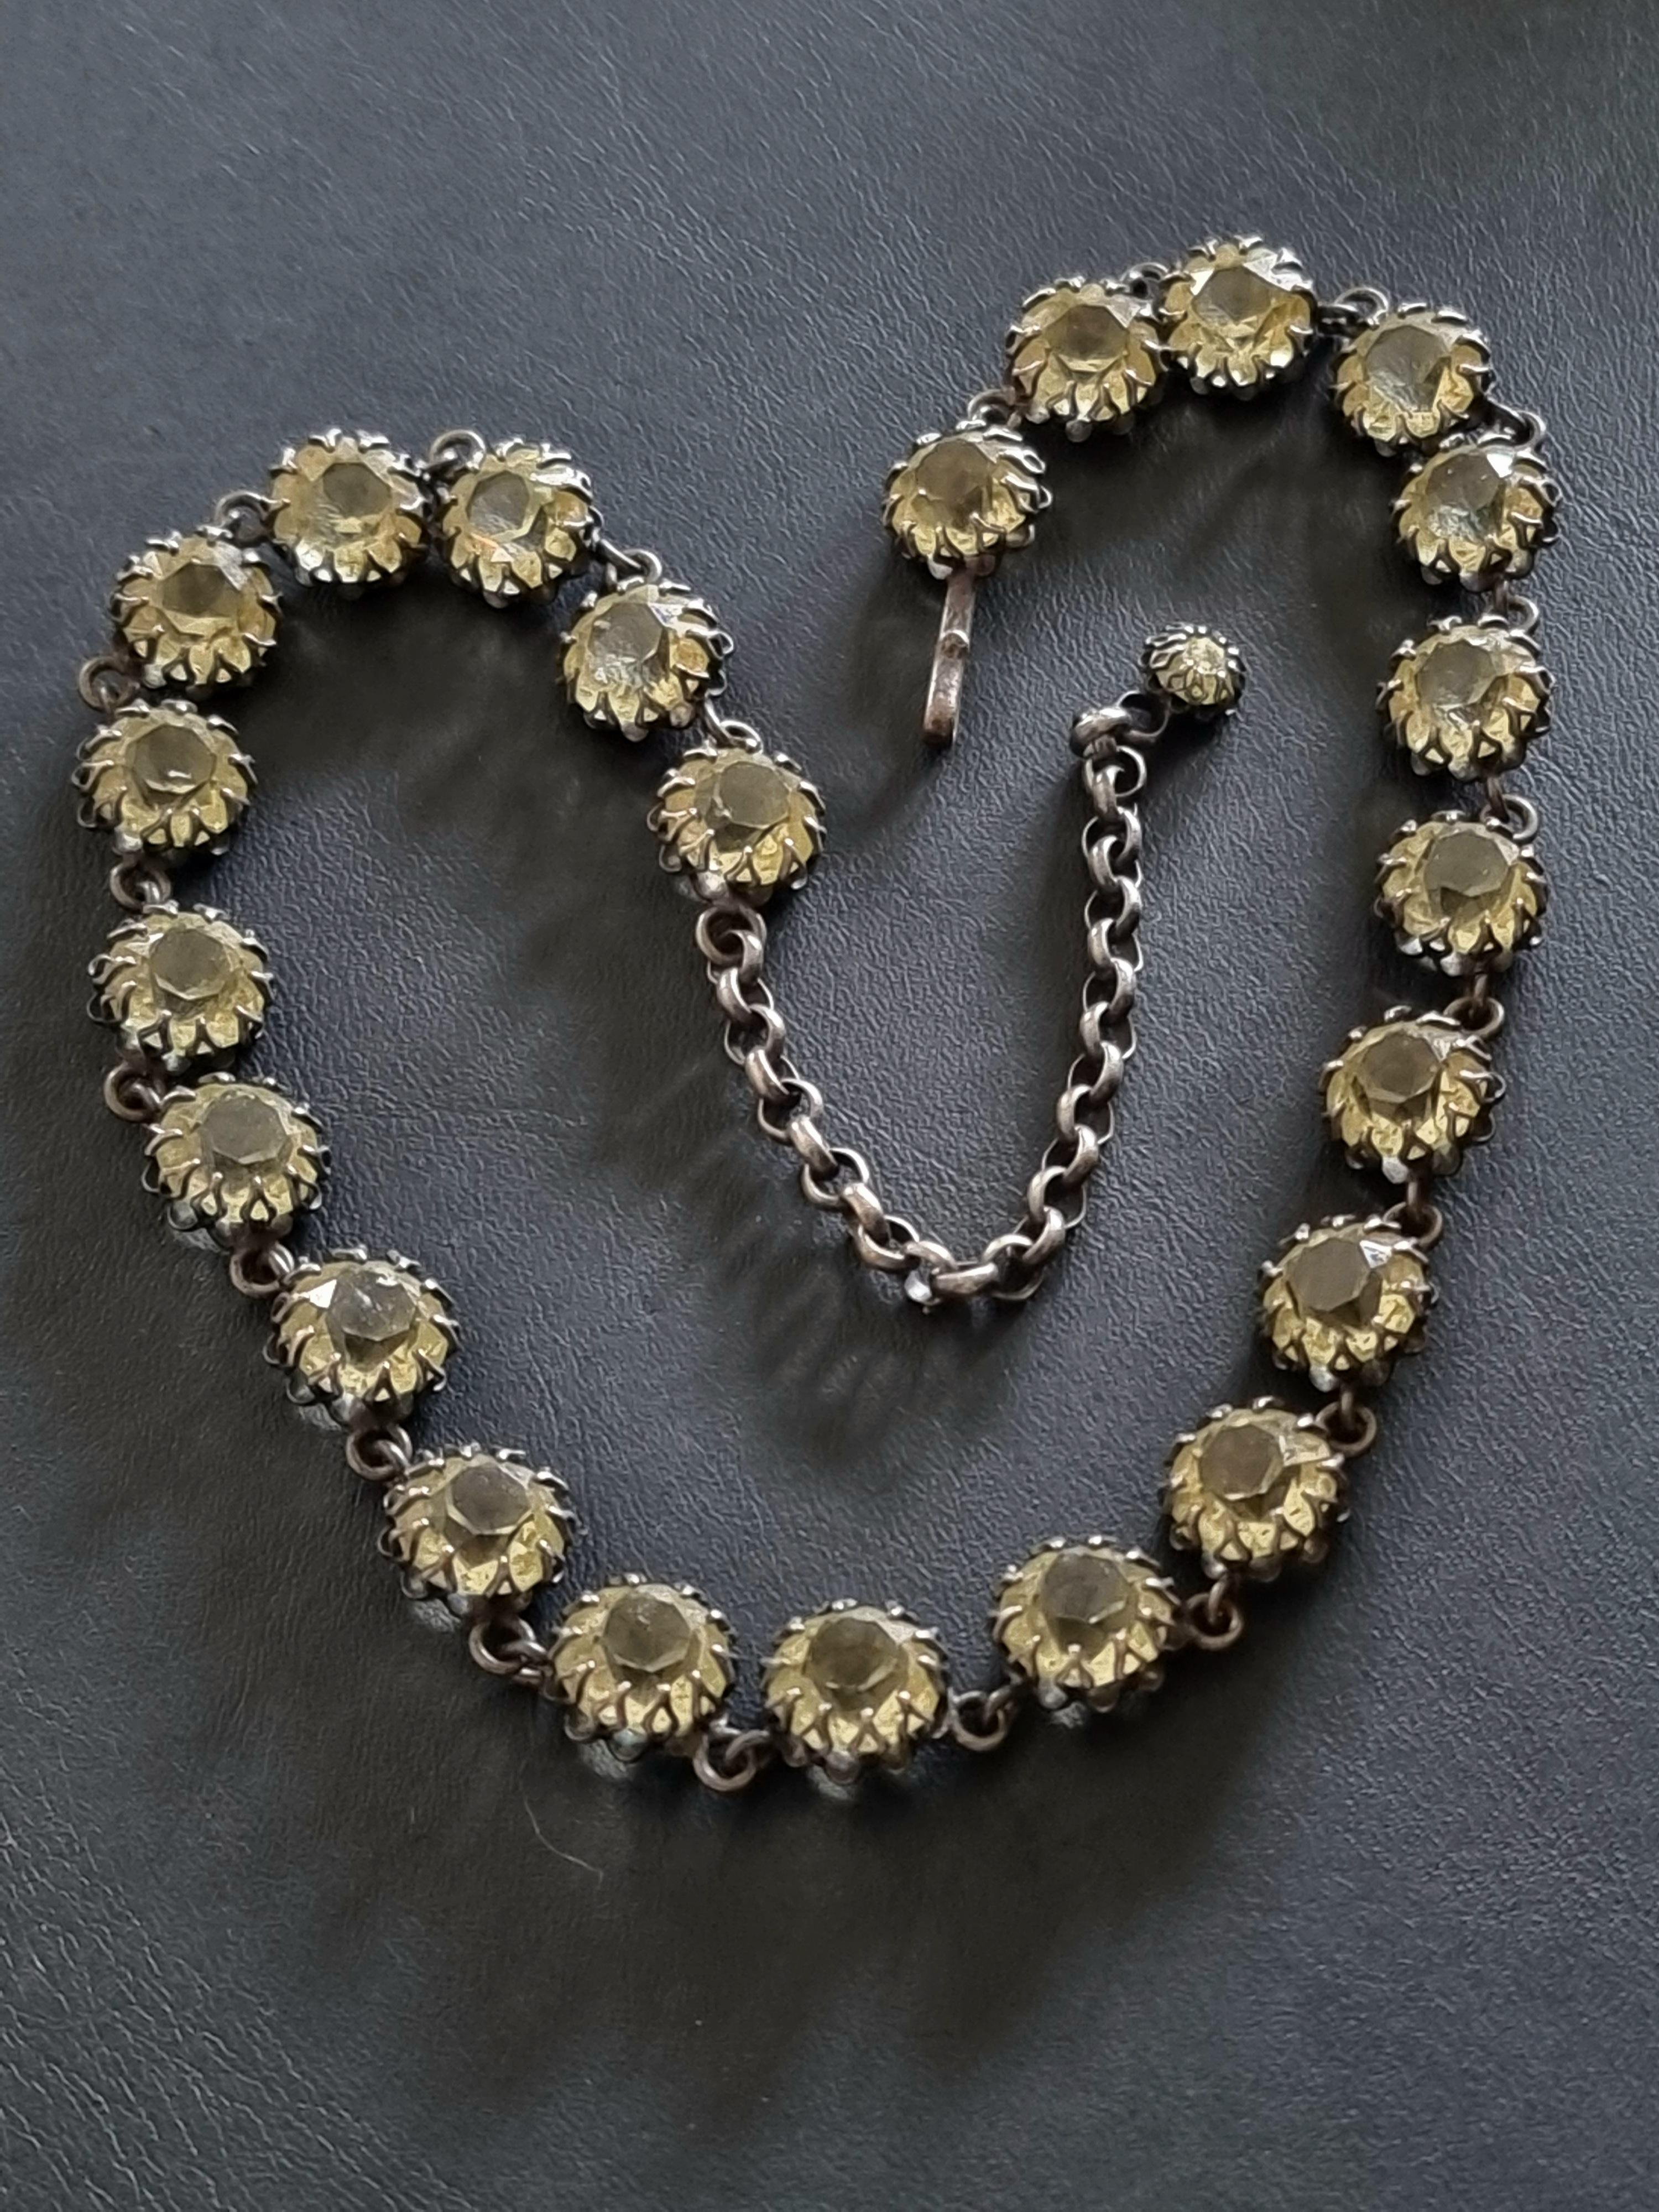 Magnificent old NECKLACE,
vintage from the 50s,
multi-color glass cabochons,
haute couture designer CIS Countess Cissy ZOLTOWSKA,
total length 46 cm, length without clasp chain 35 cm, weight 28 g,
adjustable length,
very good state.

Countess Cissy